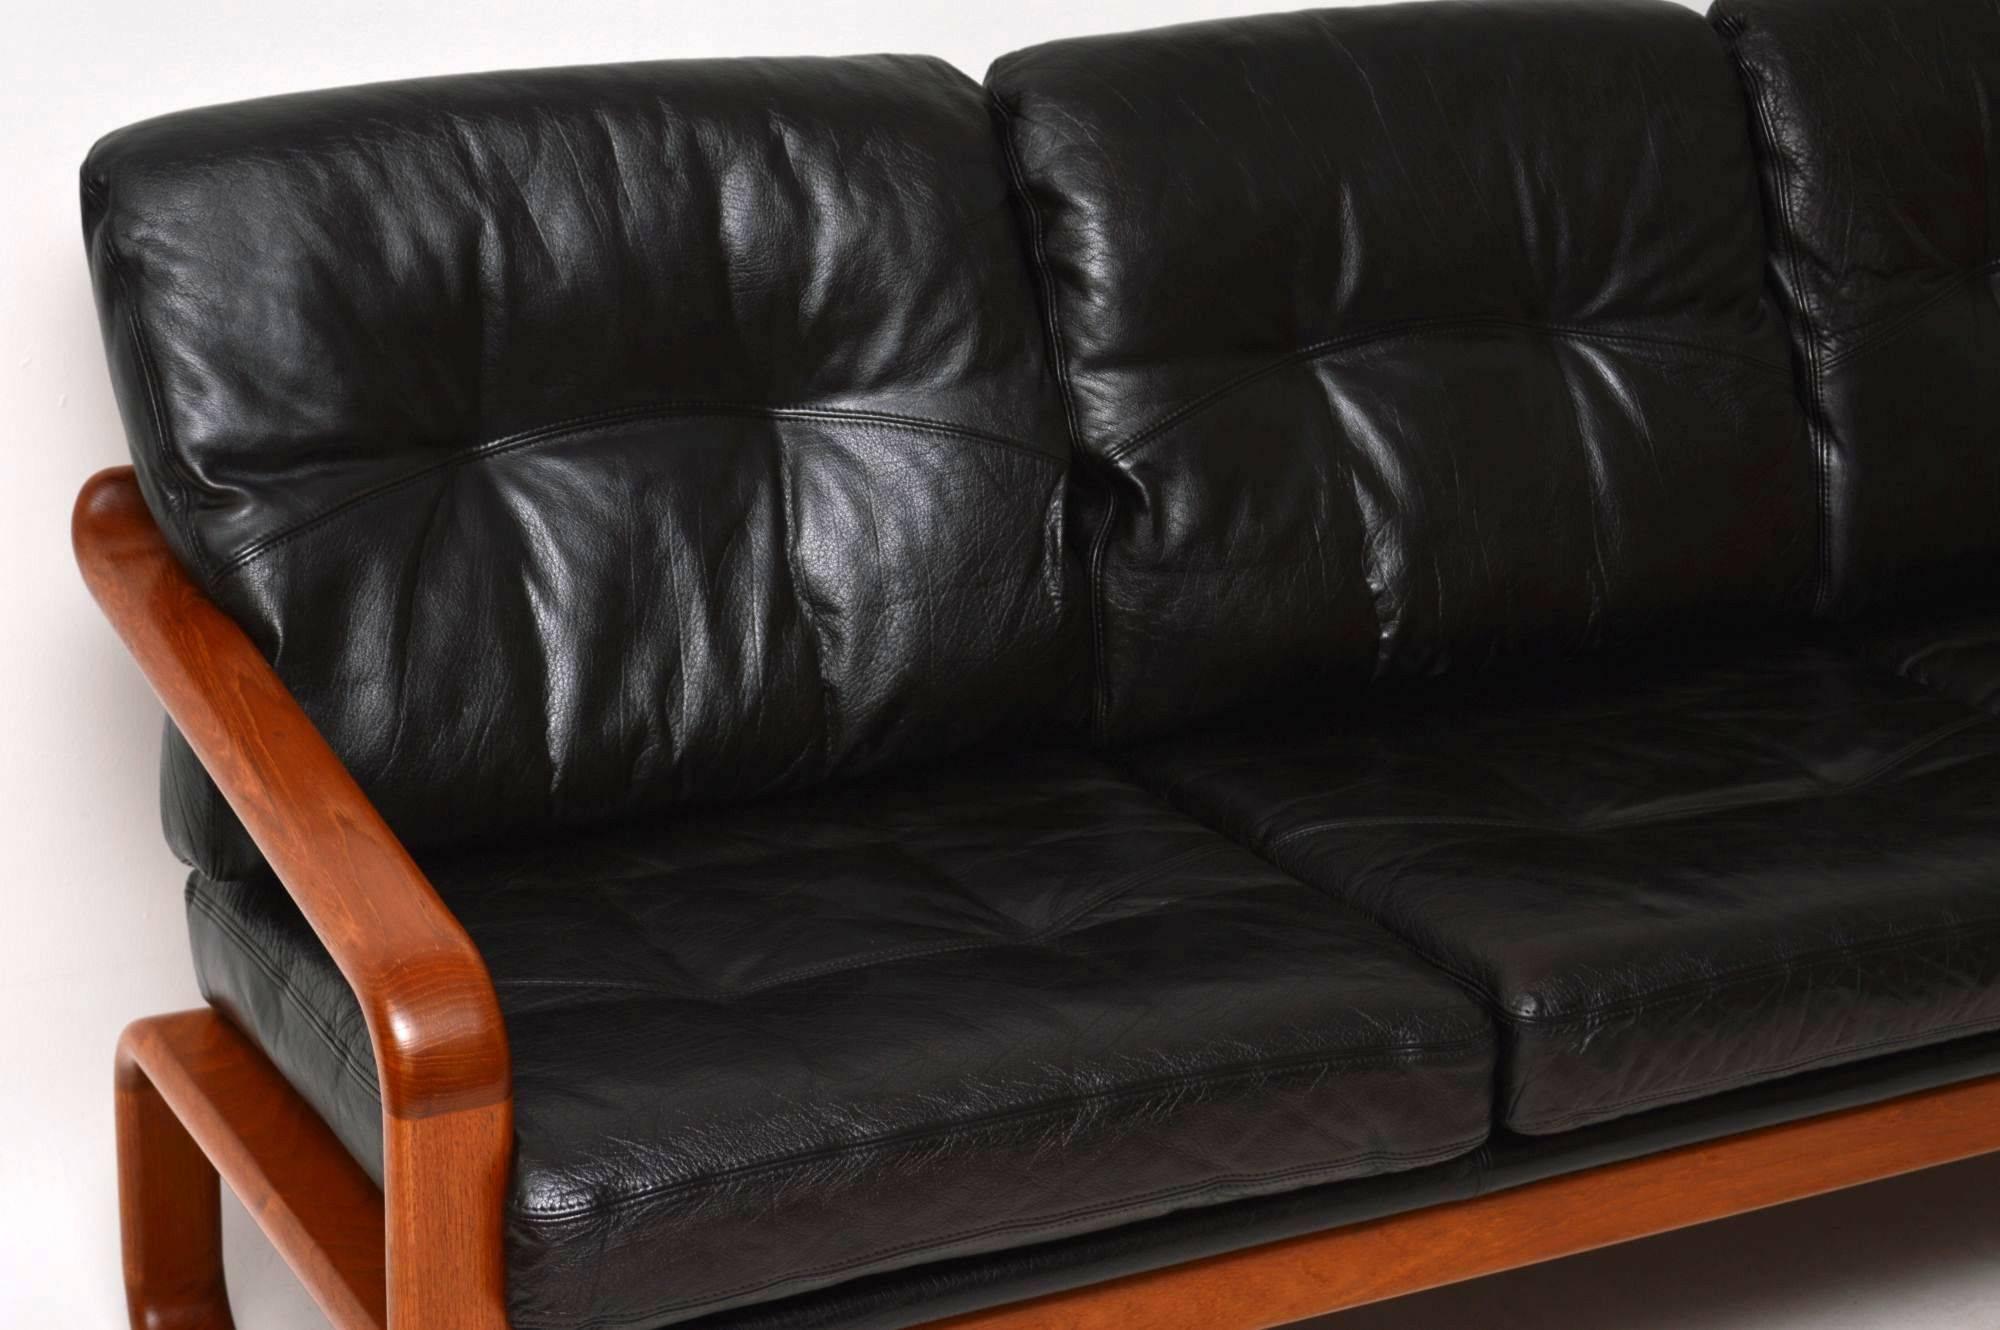 A very stylish and extremely comfortable vintage sofa, this was made in Denmark and dates from circa 1960s-1970s. The quality is amazing, it has a solid teak frame and black leather cushions. The condition is superb for its age, we have had the